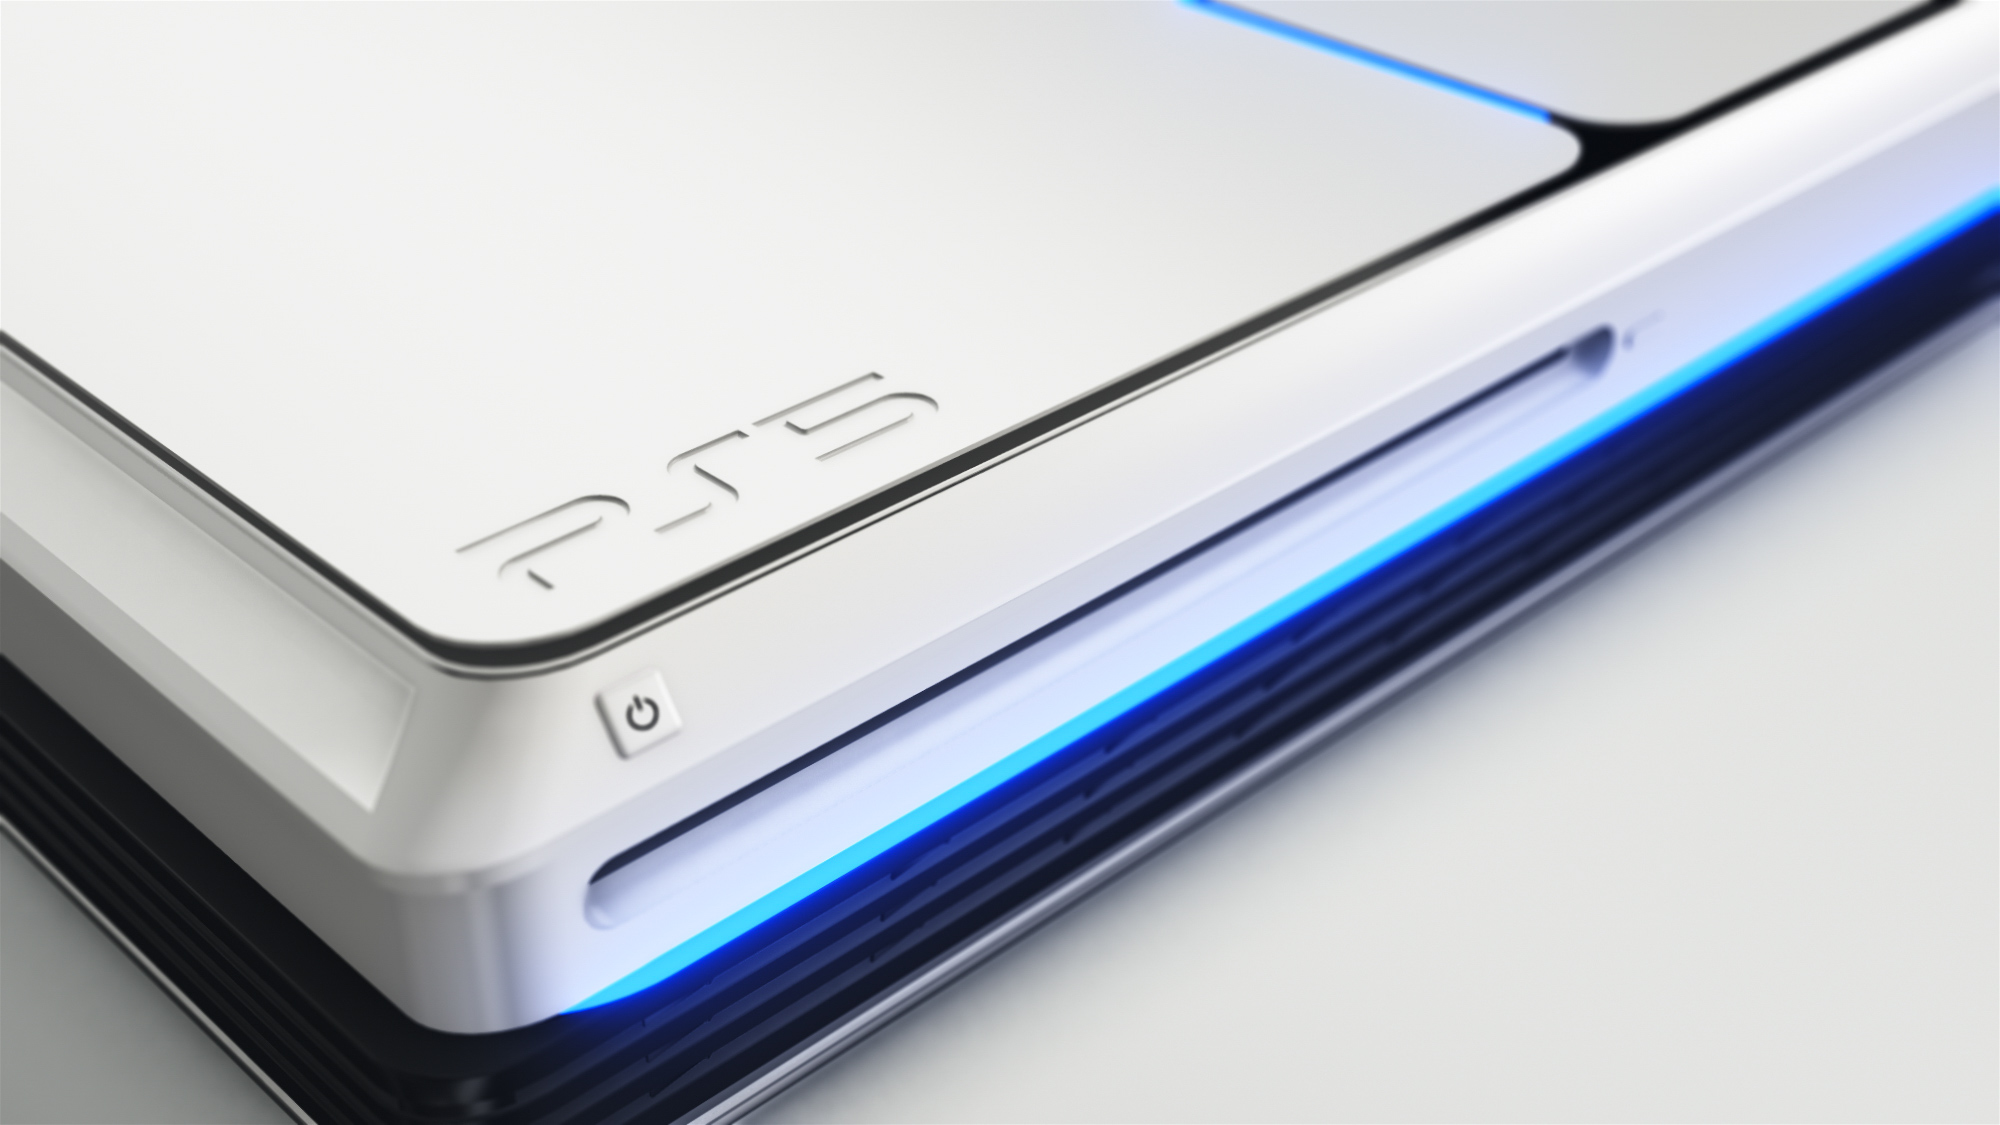 PS5 news: This incredible PlayStation 5 design shows off the console we all want | T3